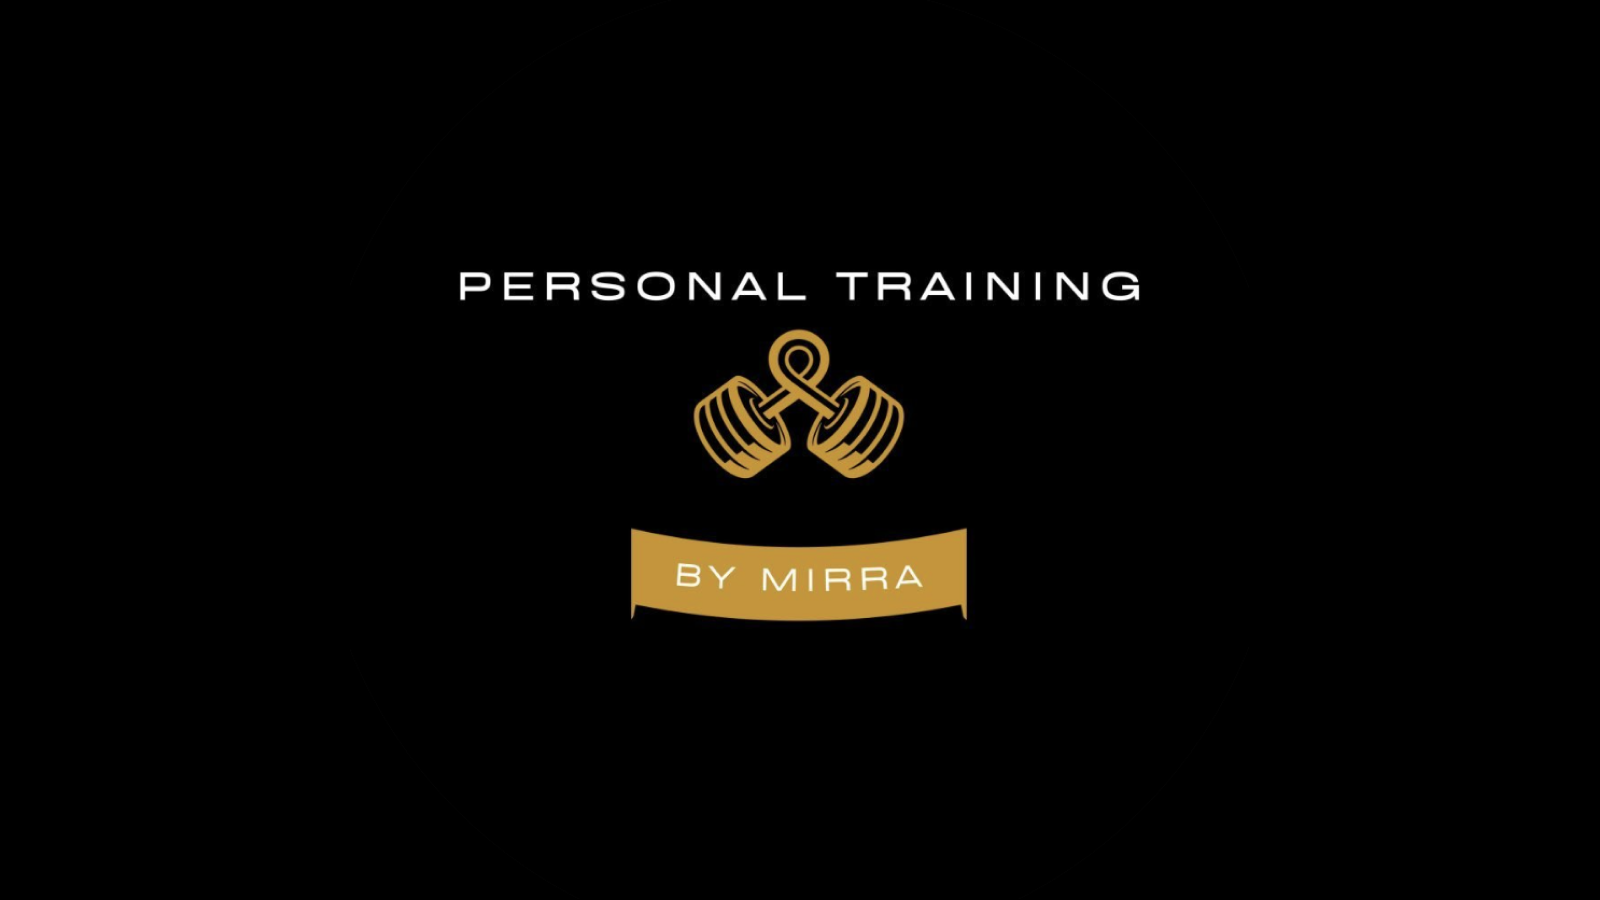 An image of Personal Training by Mirra